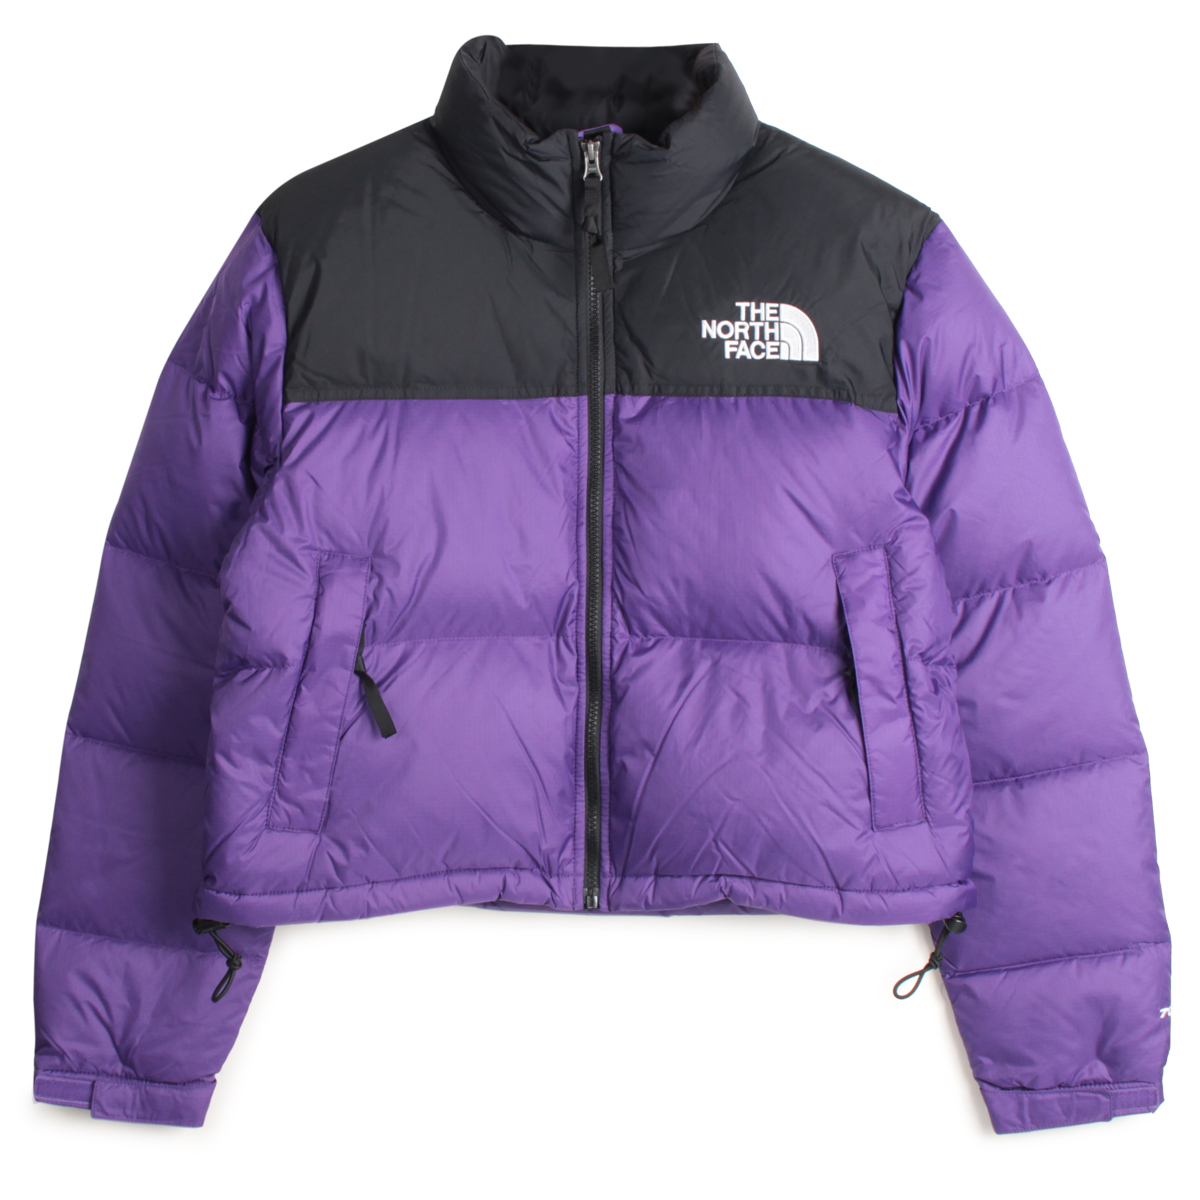 The North Face Puffer Jacket Purple Online Shopping For Women Men Kids Fashion Lifestyle Free Delivery Returns